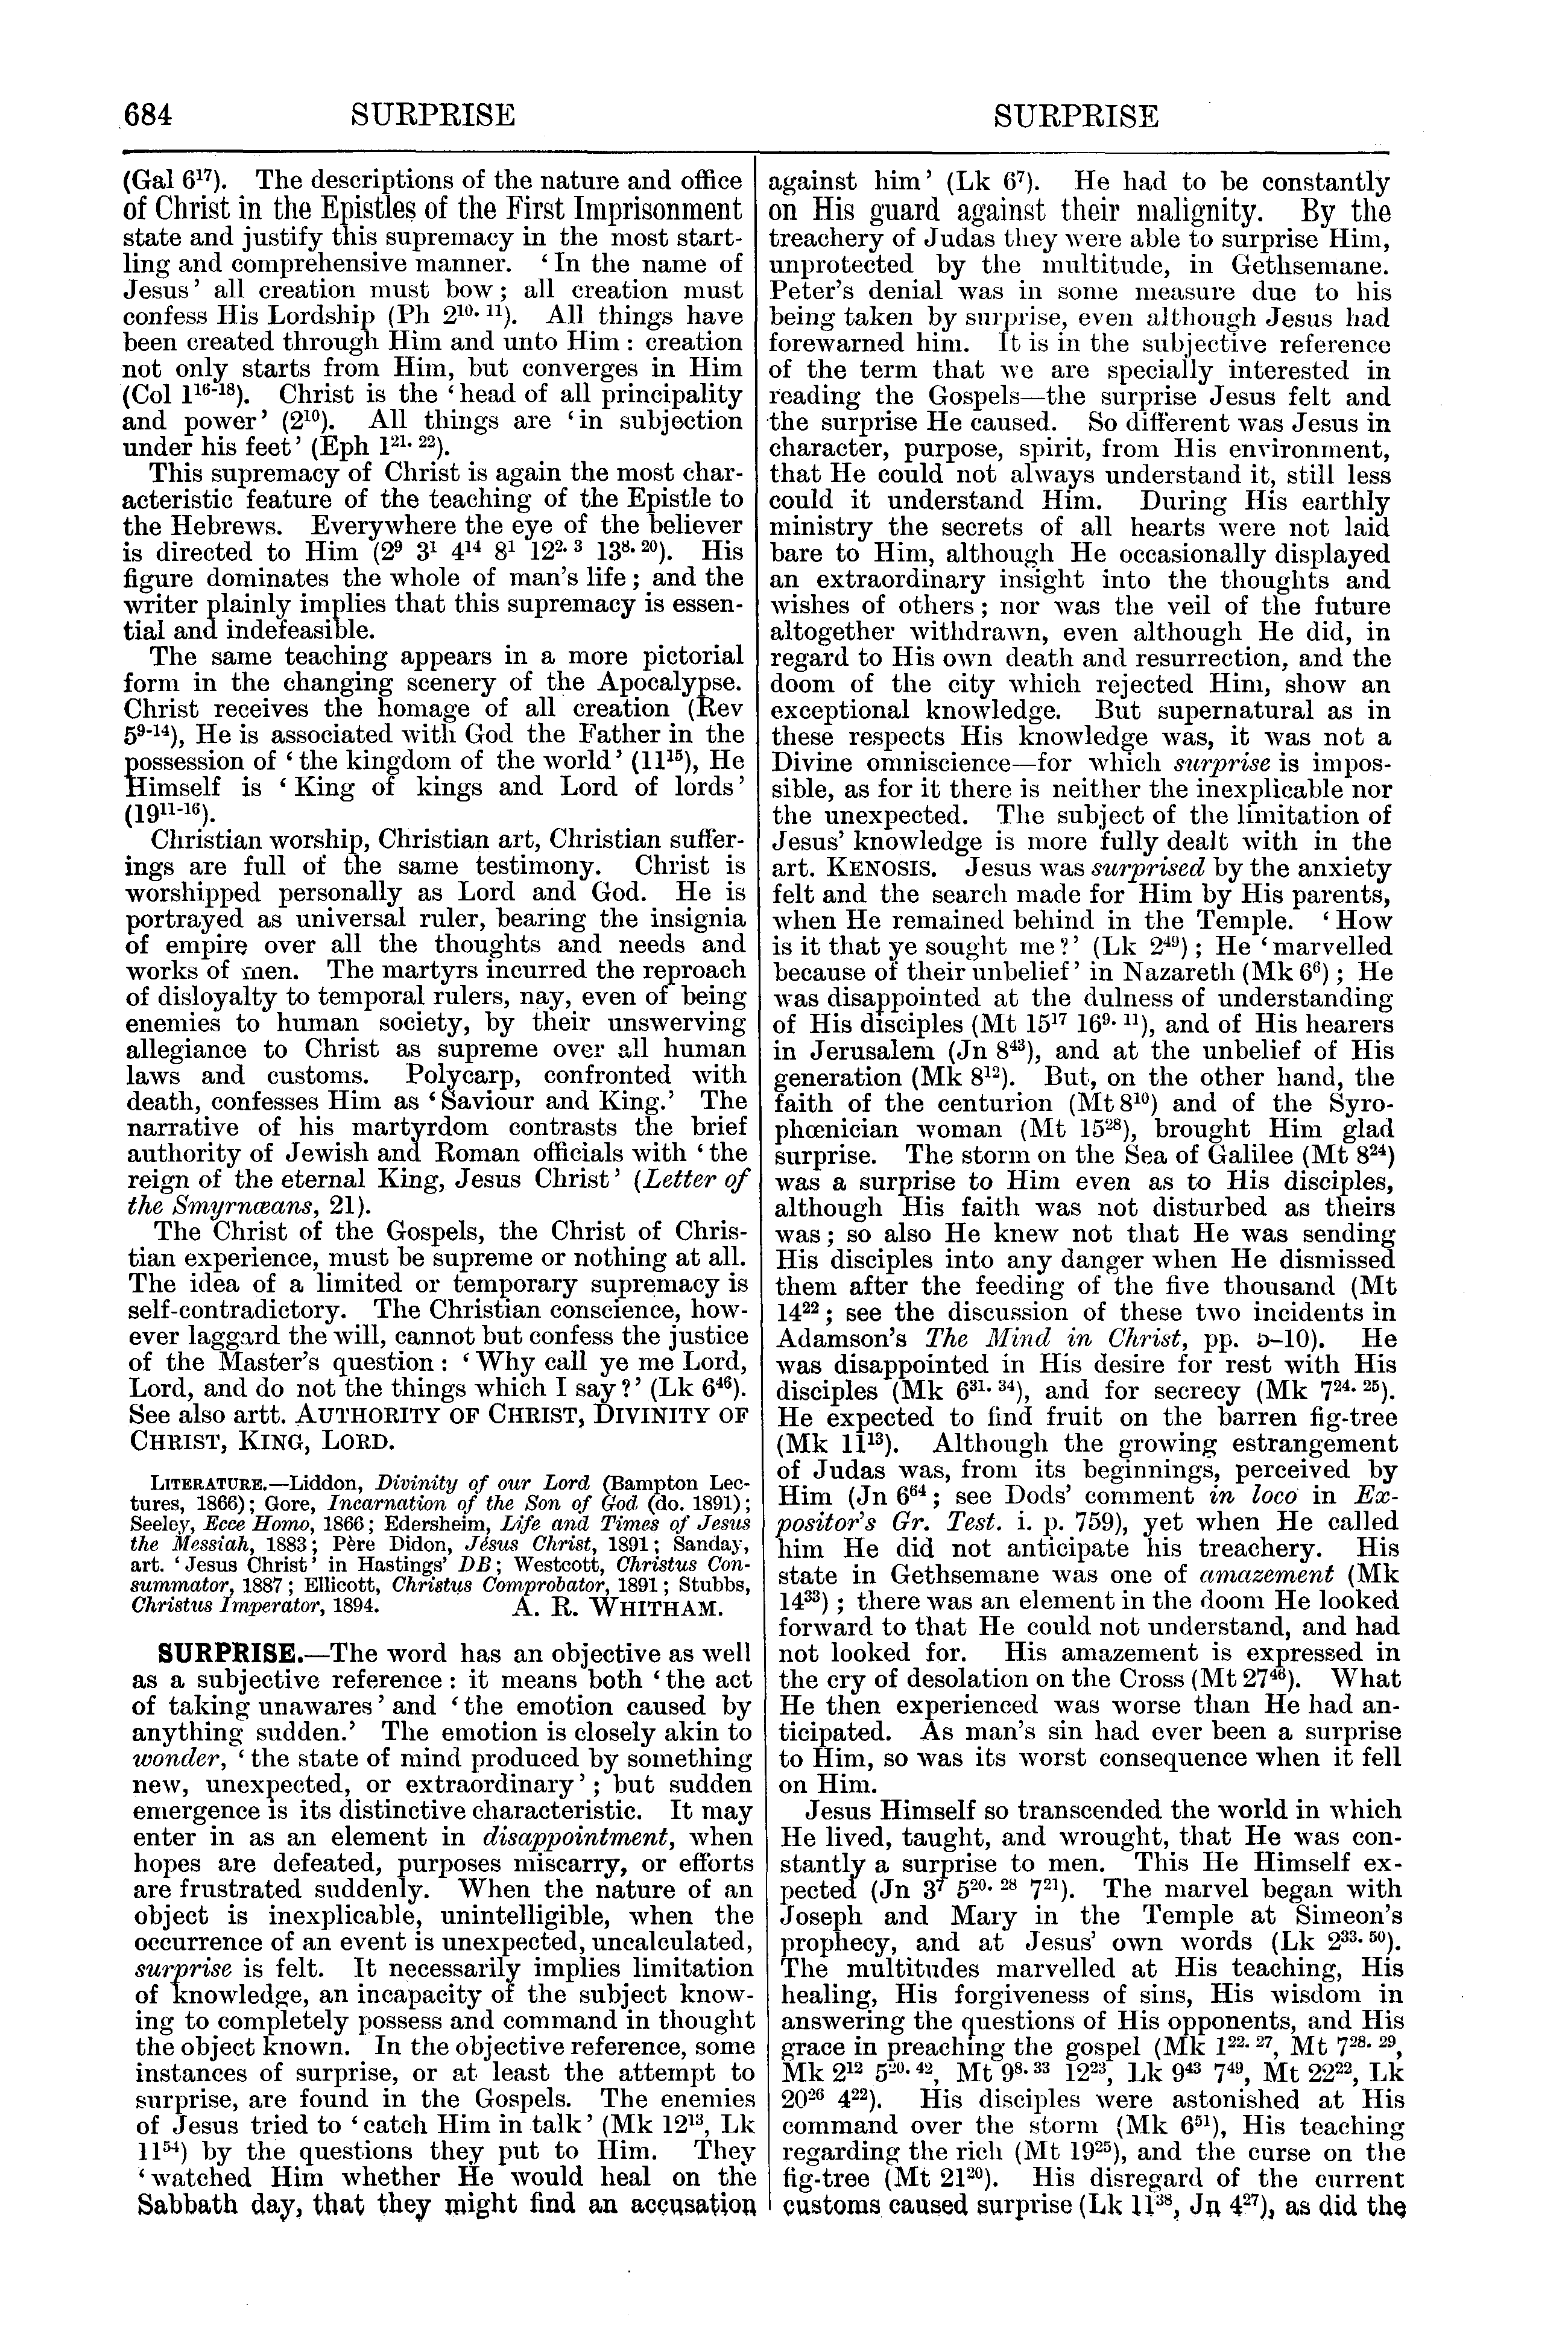 Image of page 684